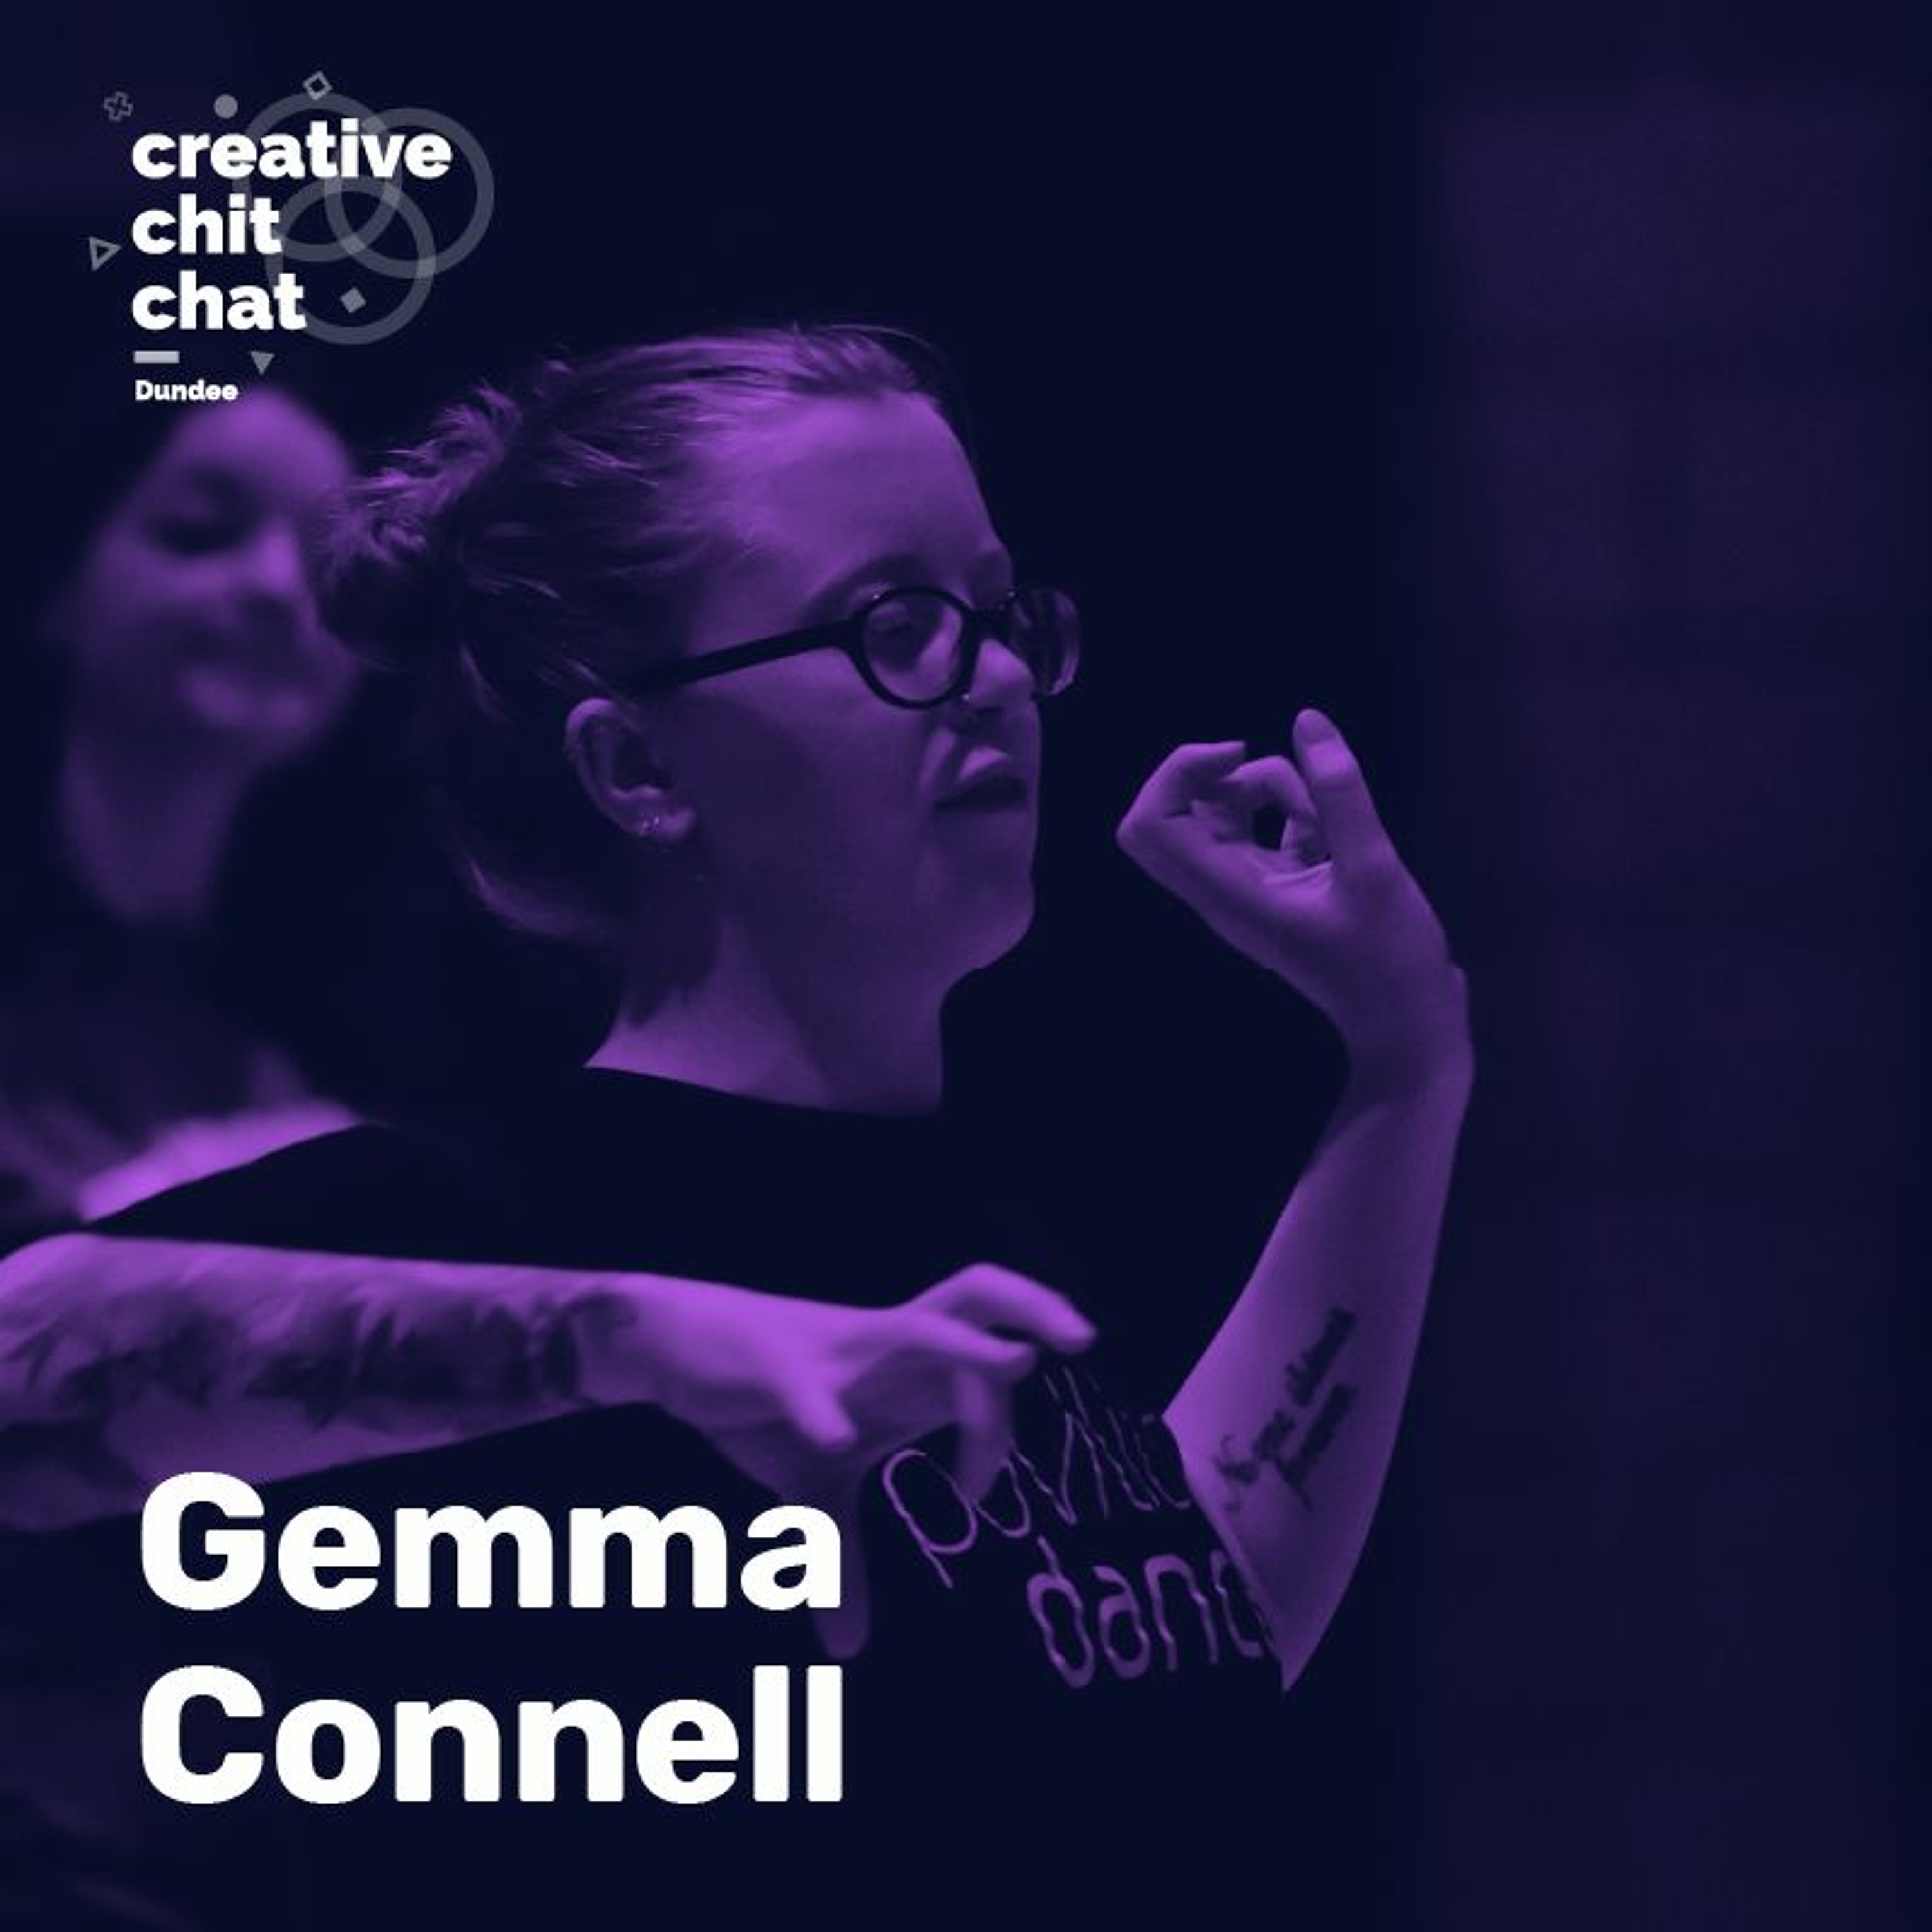 Gemma Connell - Dance, choreography and hip hop culture